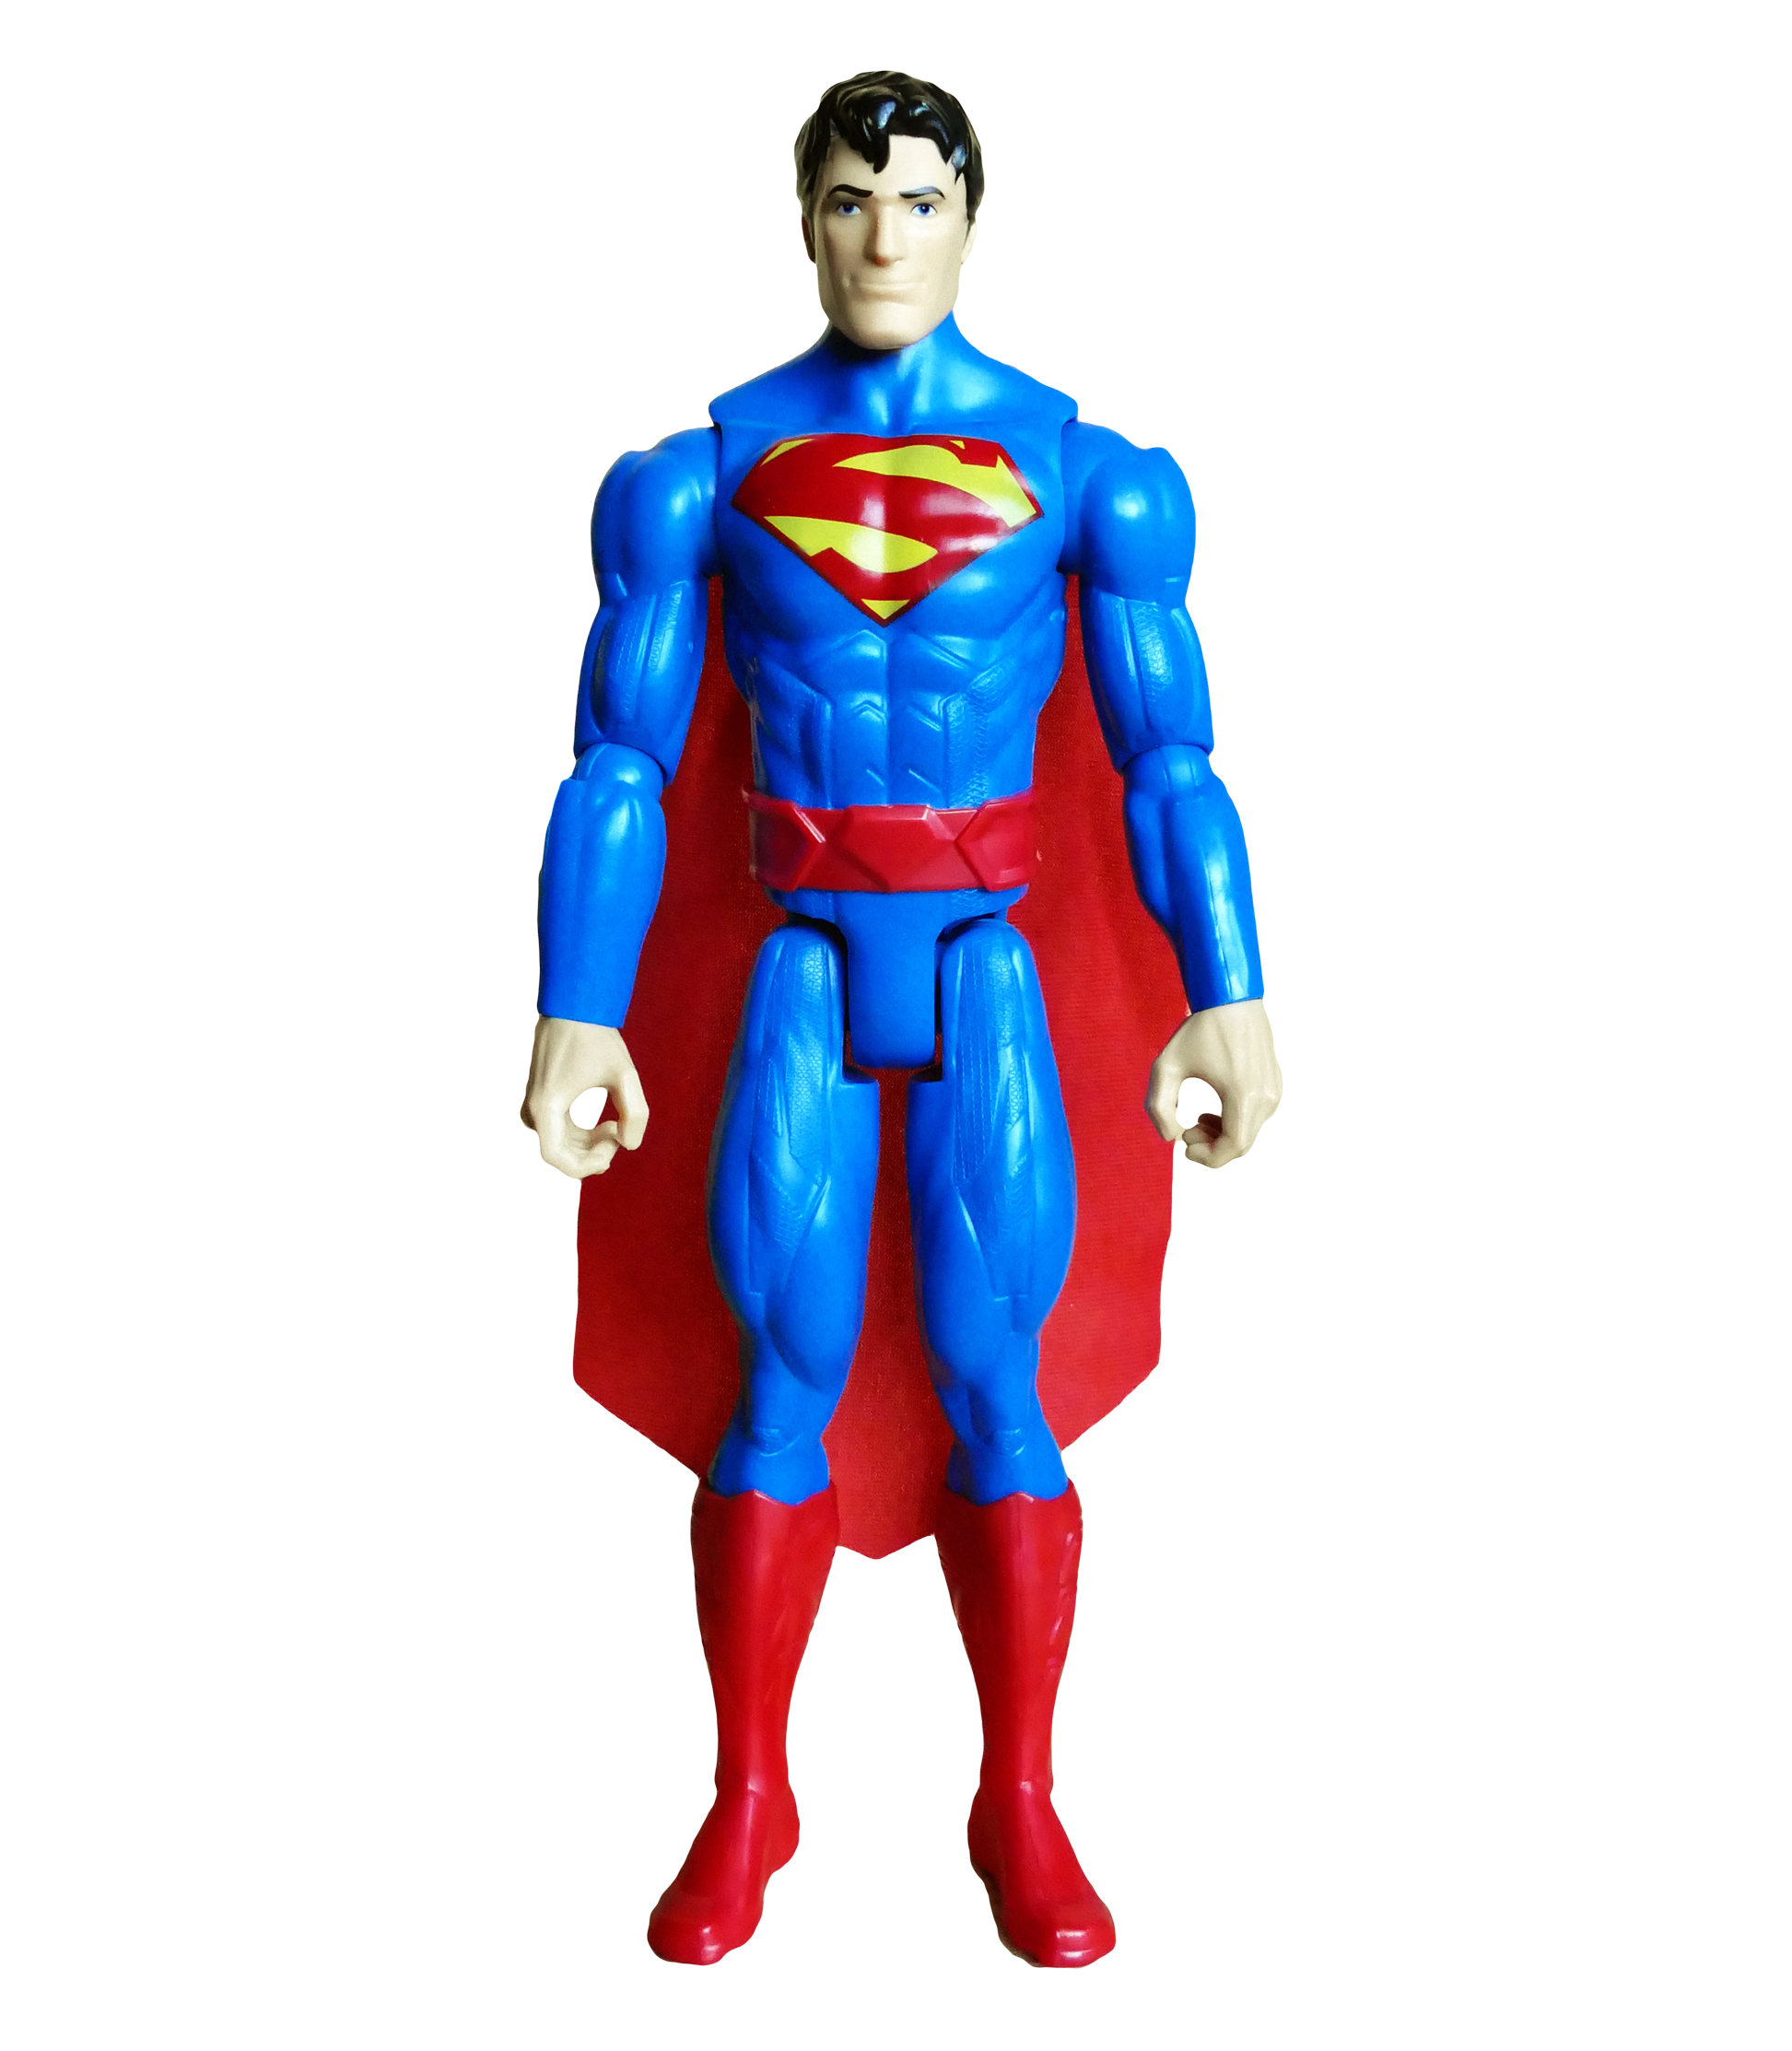 A Toy Action Figure Of A Superhero